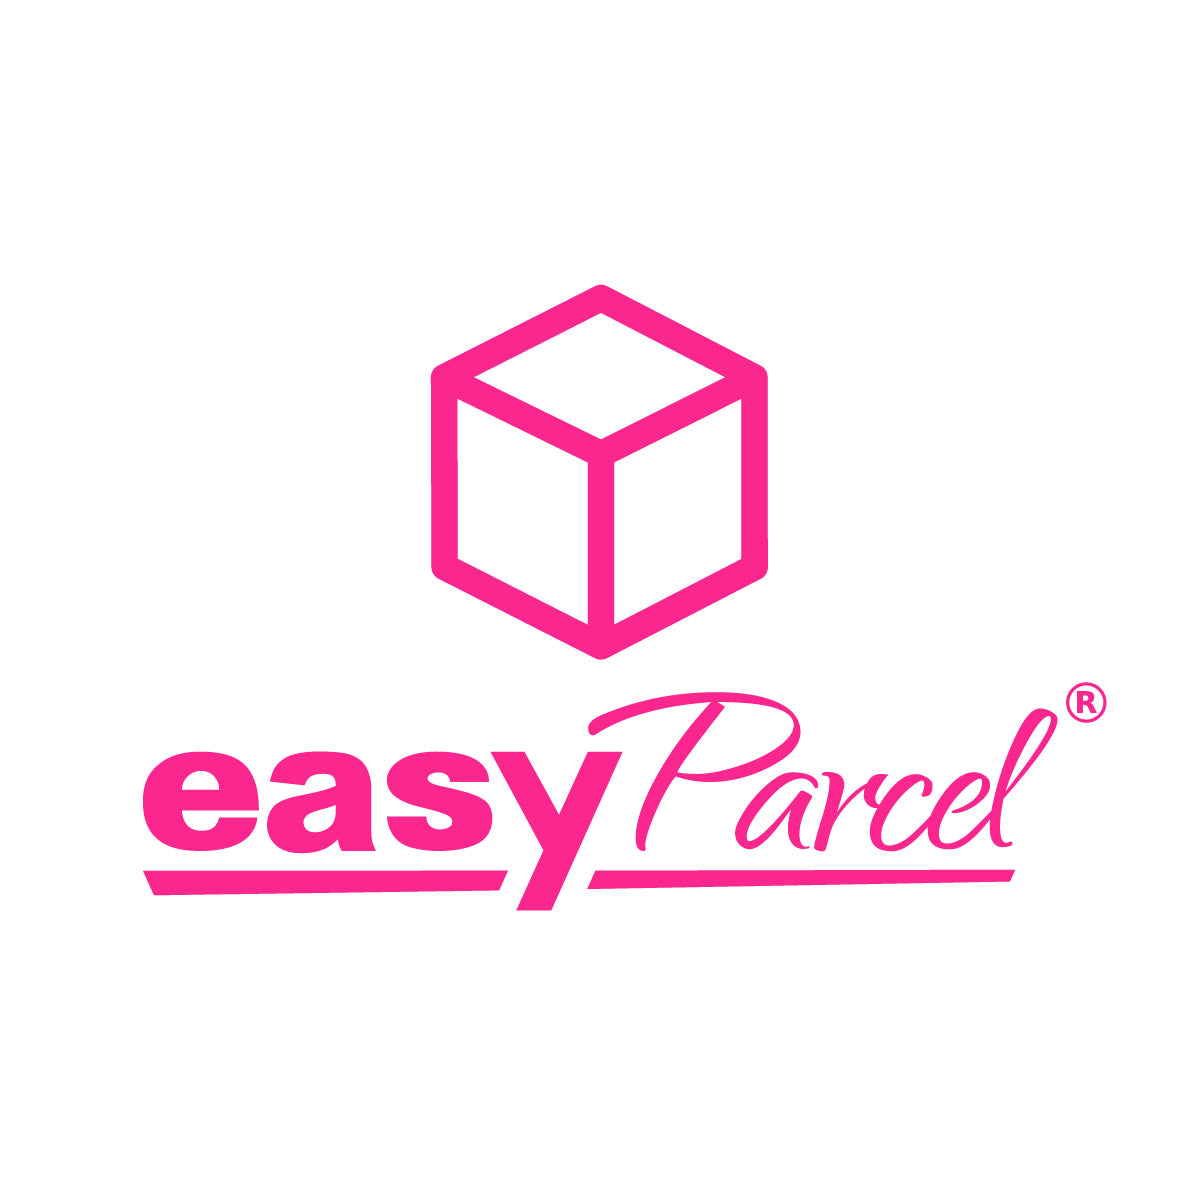 EasyParcel‑ Delivery Made Easy